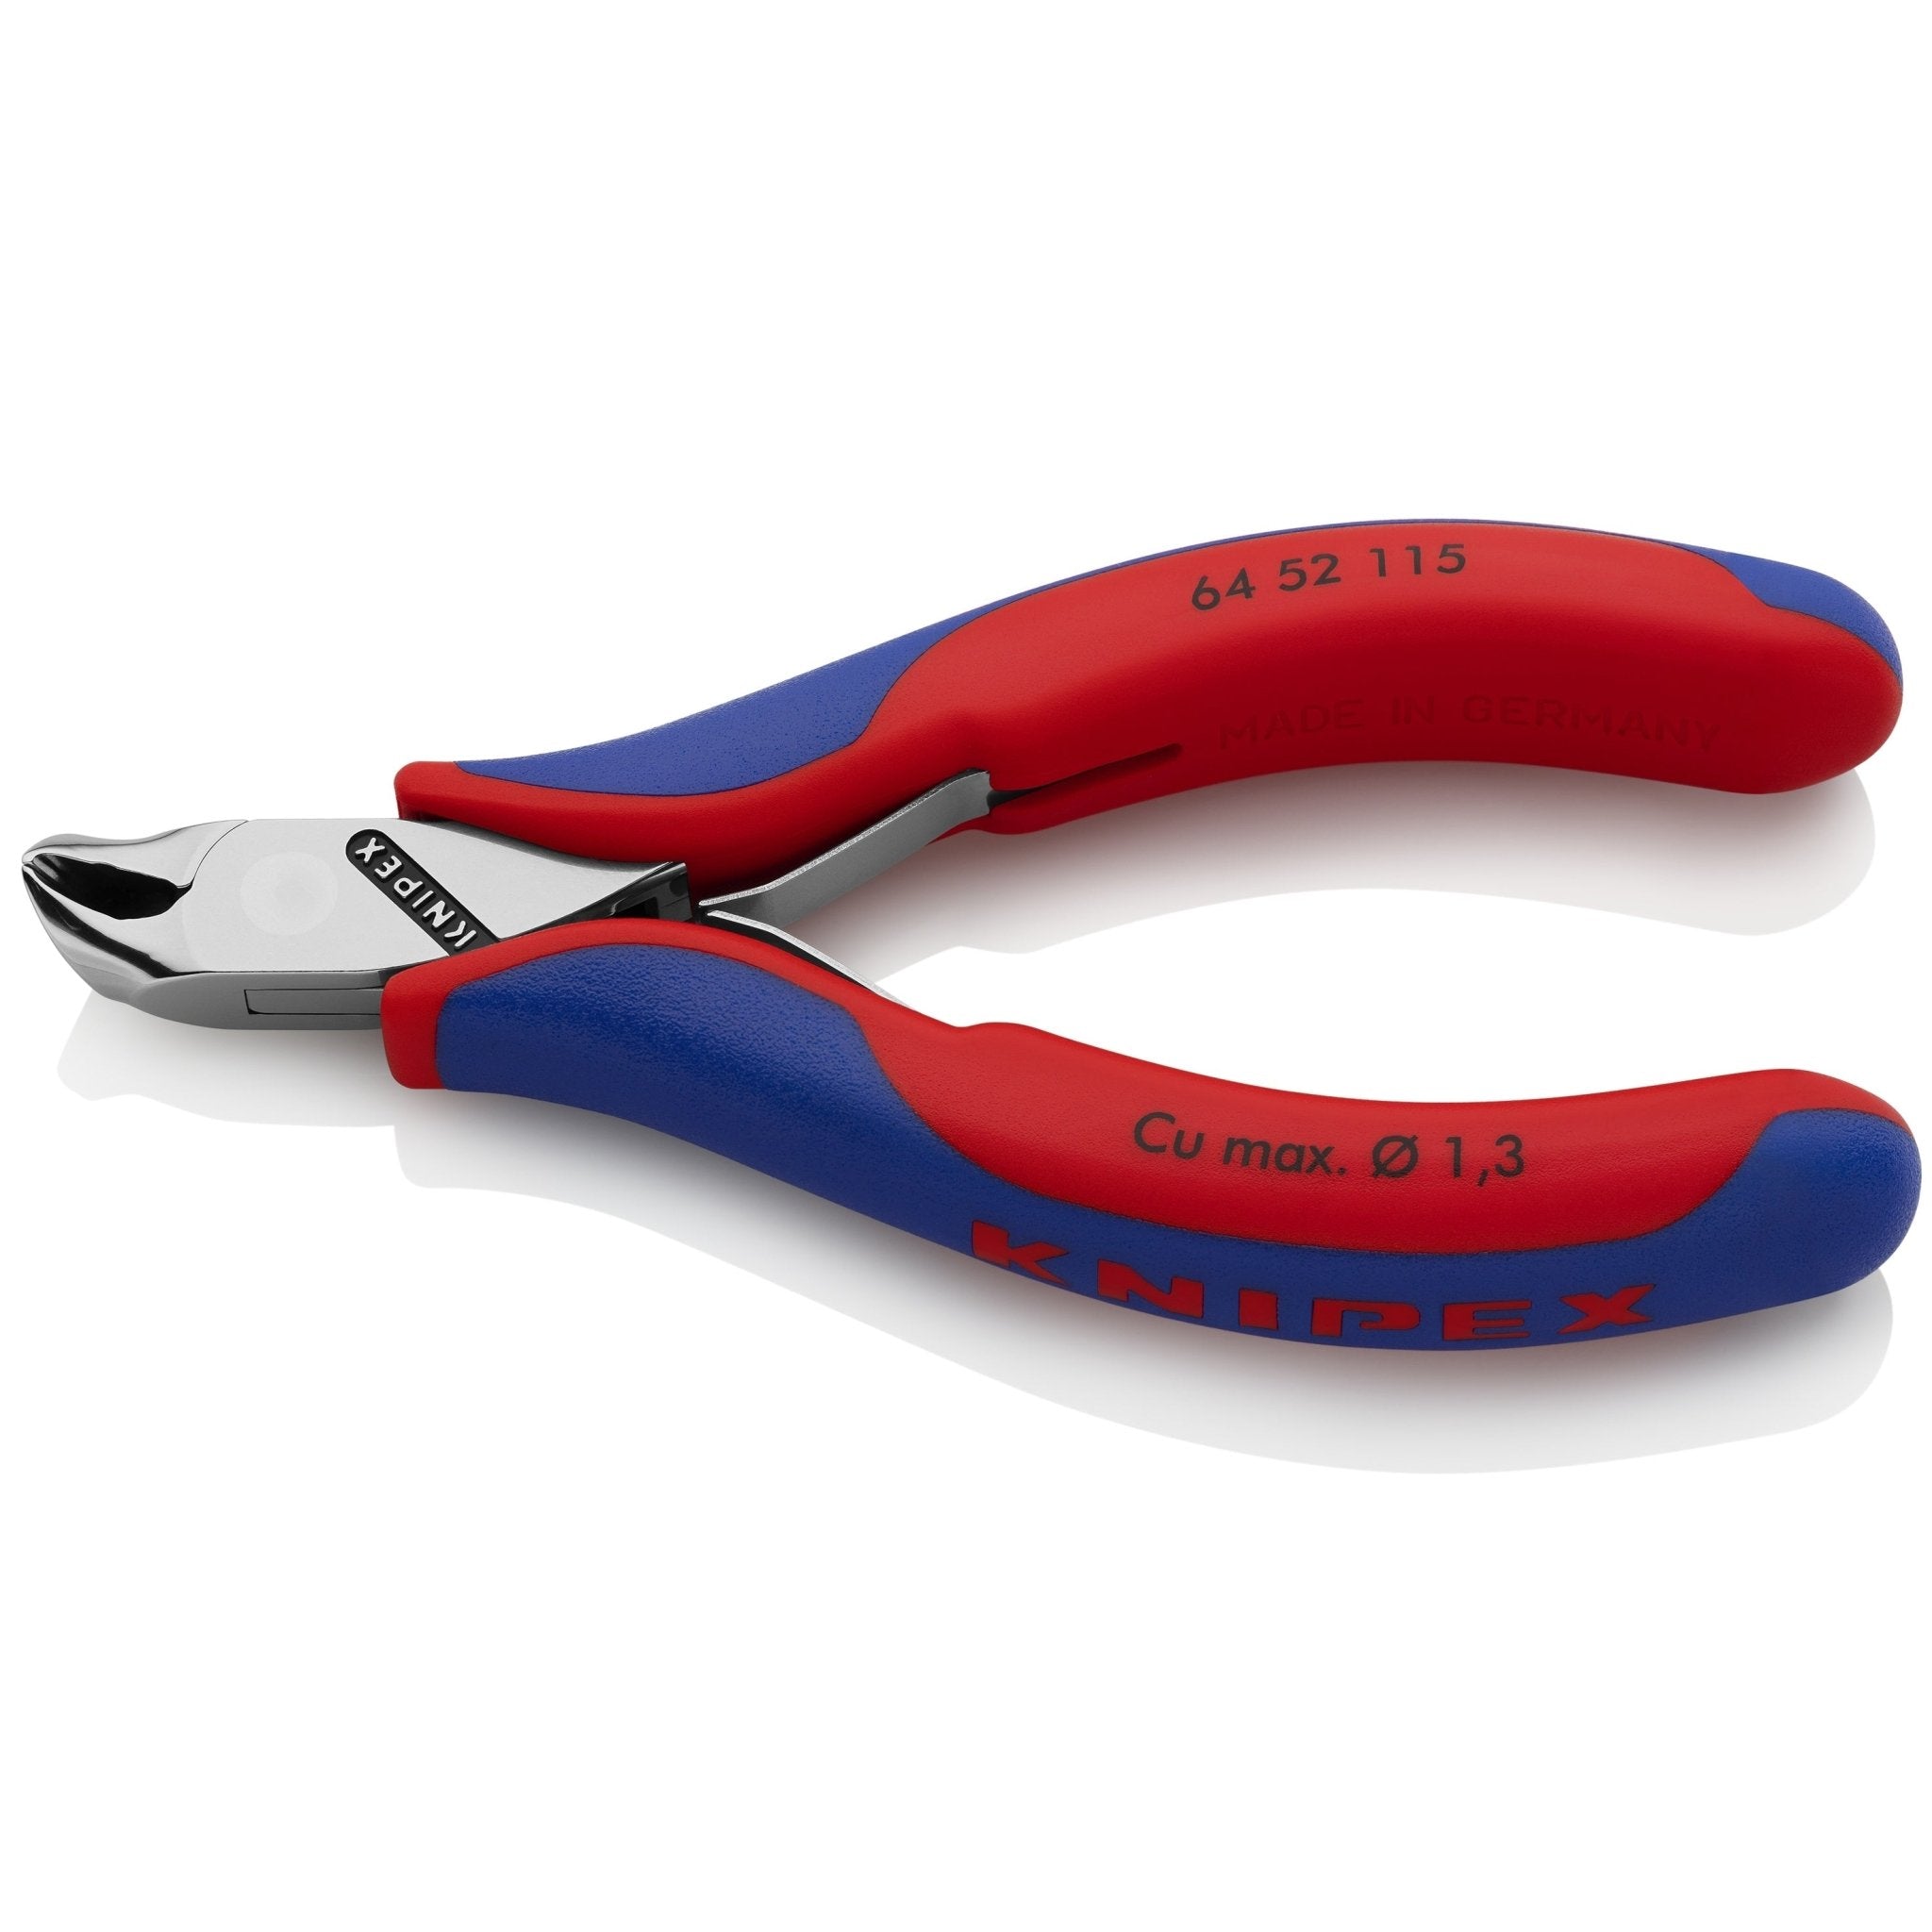 KNIPEX 4.5'' Electronics End Nippers with Comfort Grip